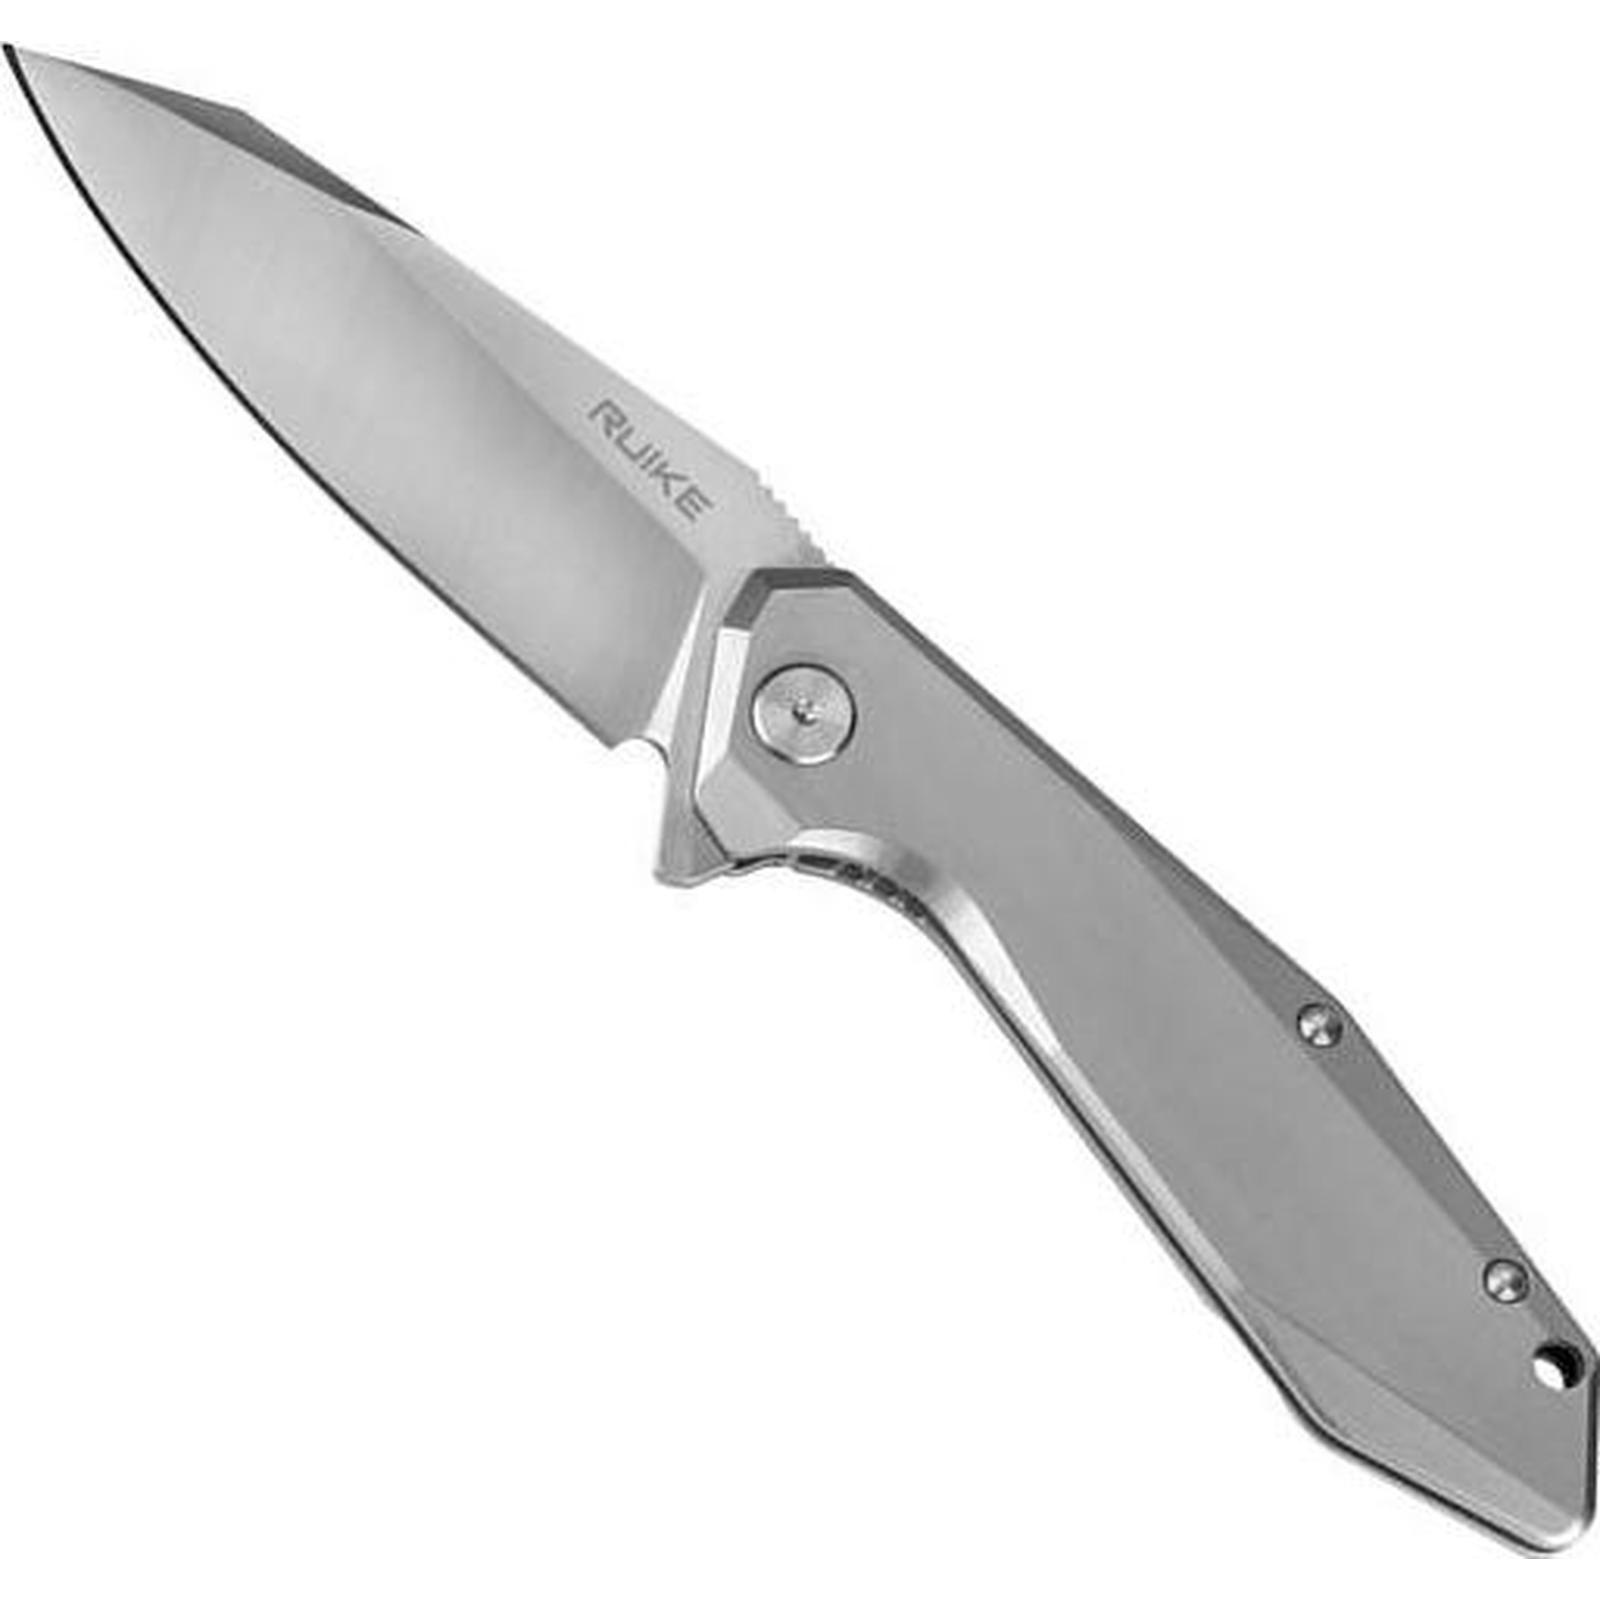 RUIKE P135-SF FOLDING KNIFE, STAINLESS